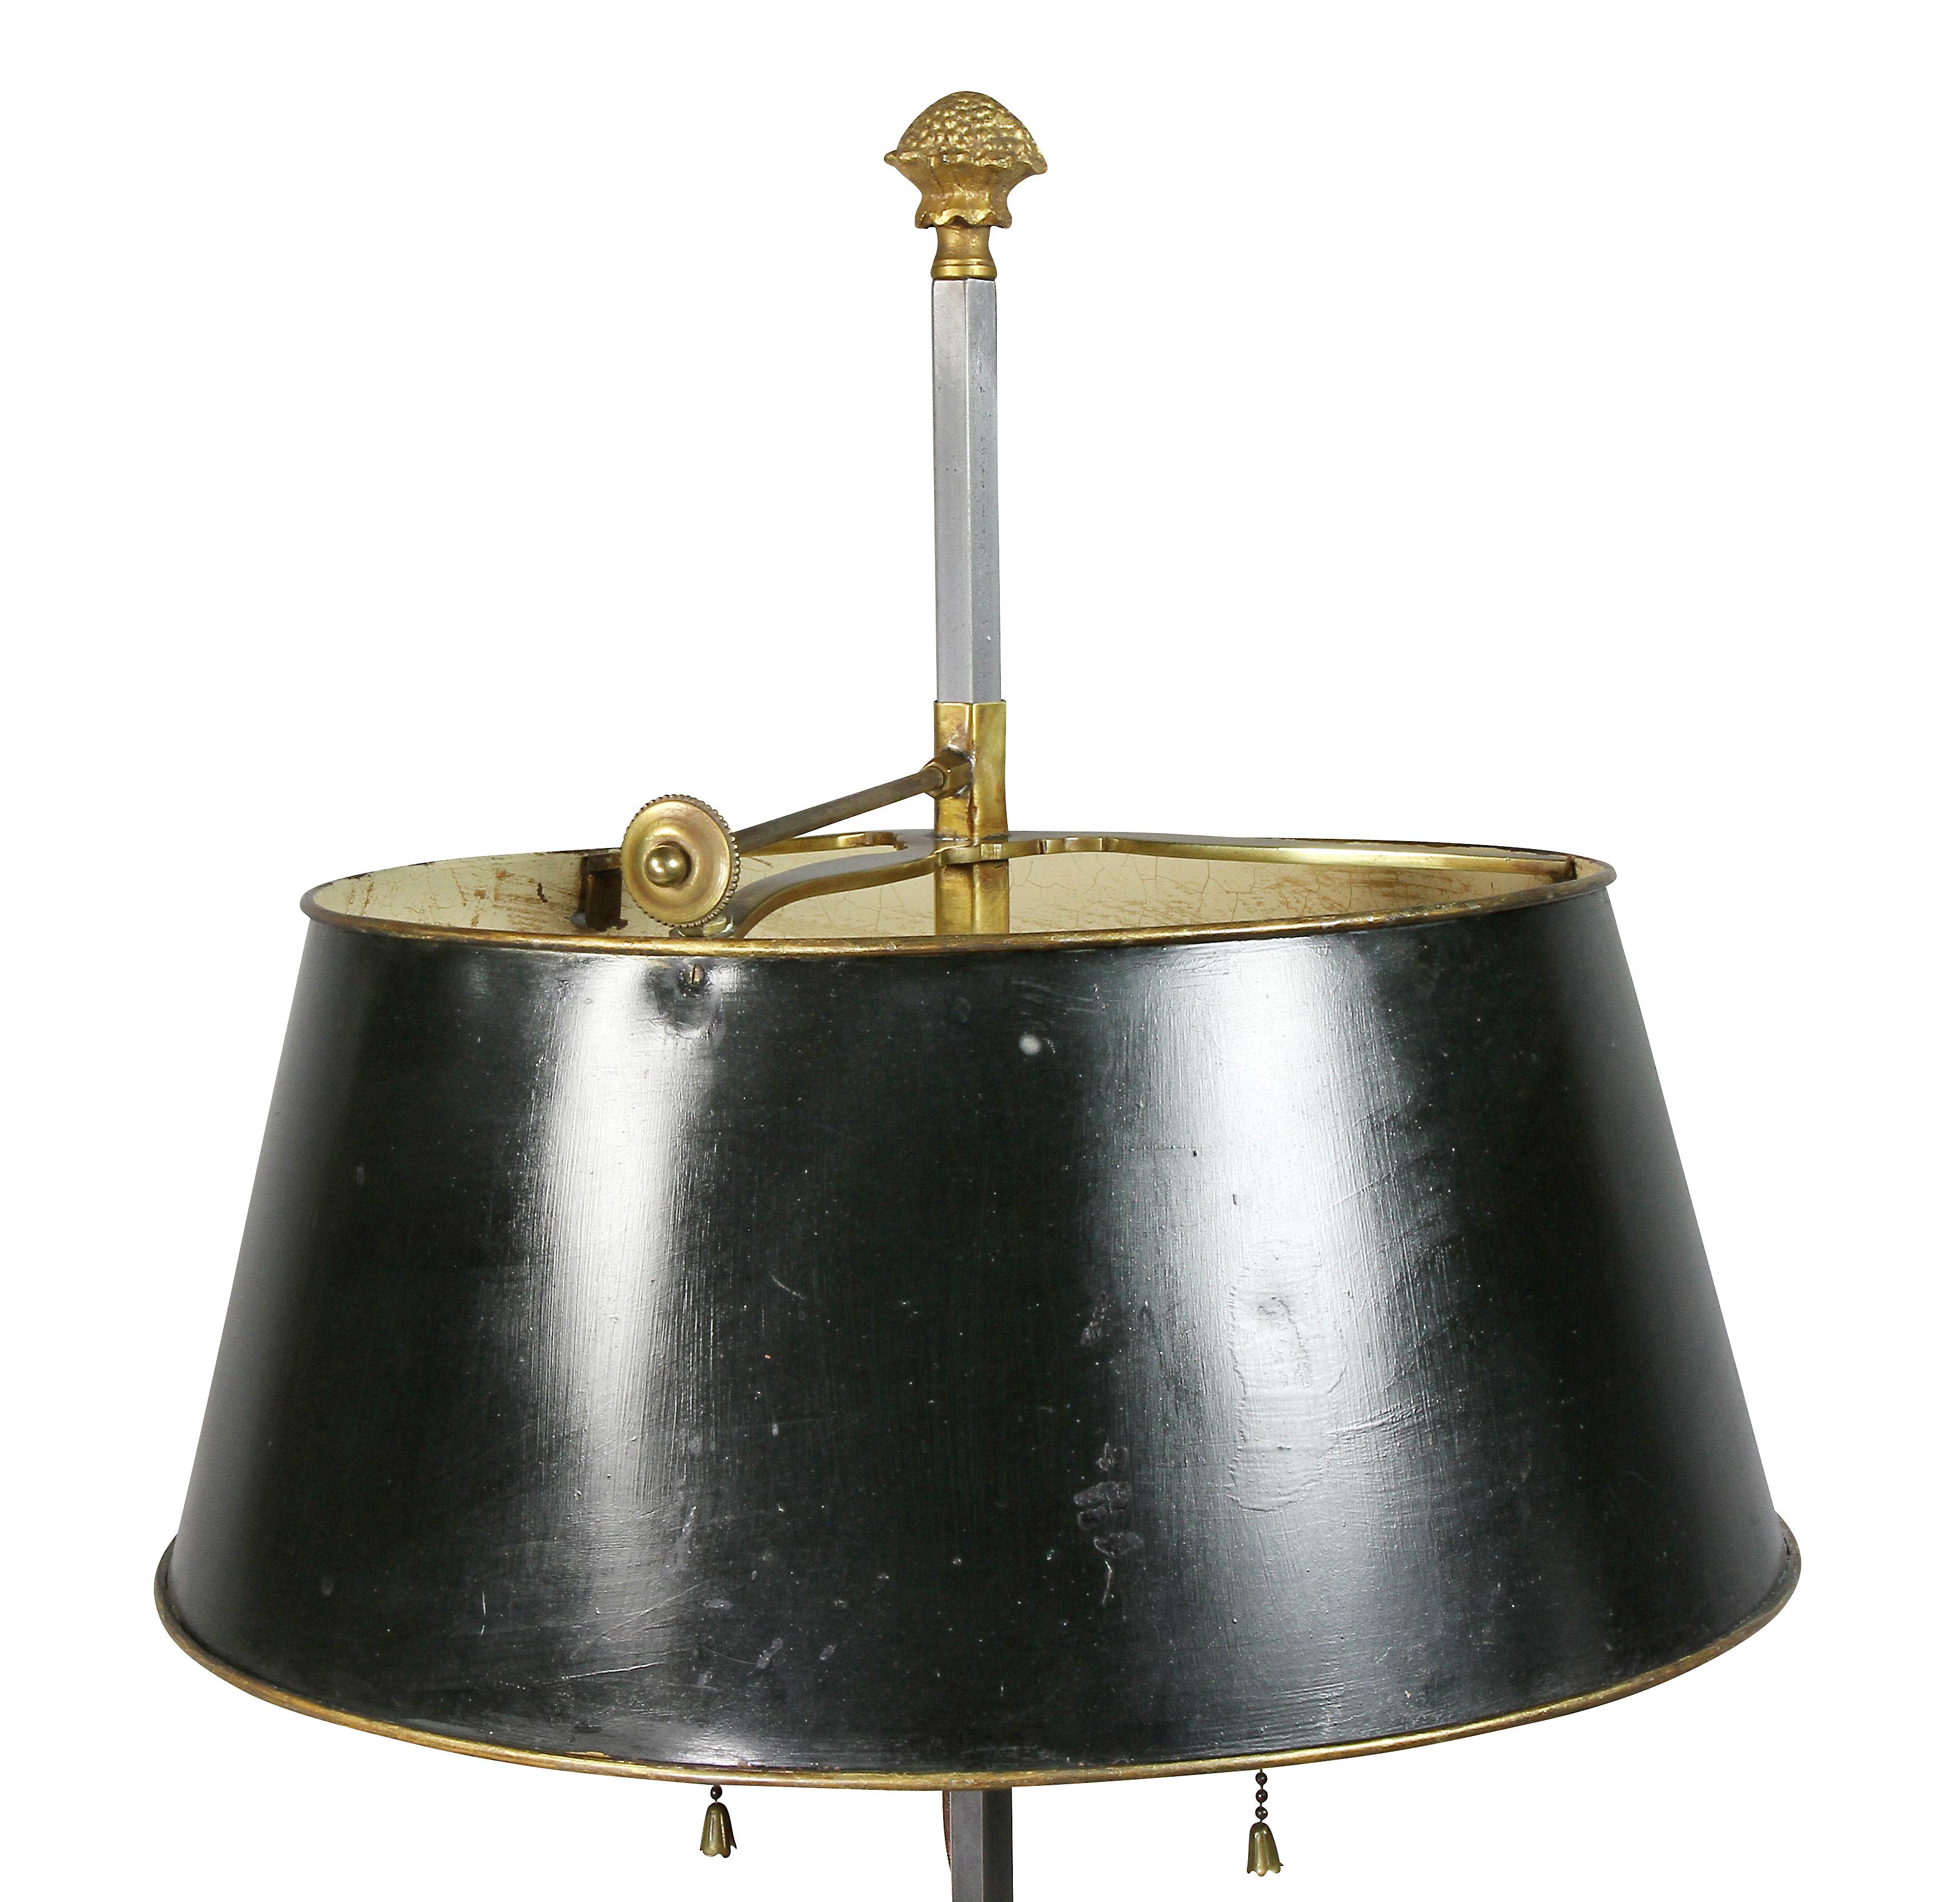 With conical green adjustable shade and gilt bronze finial, two-light and three lower candleholders over a mahogany and brass-mounted bowl.